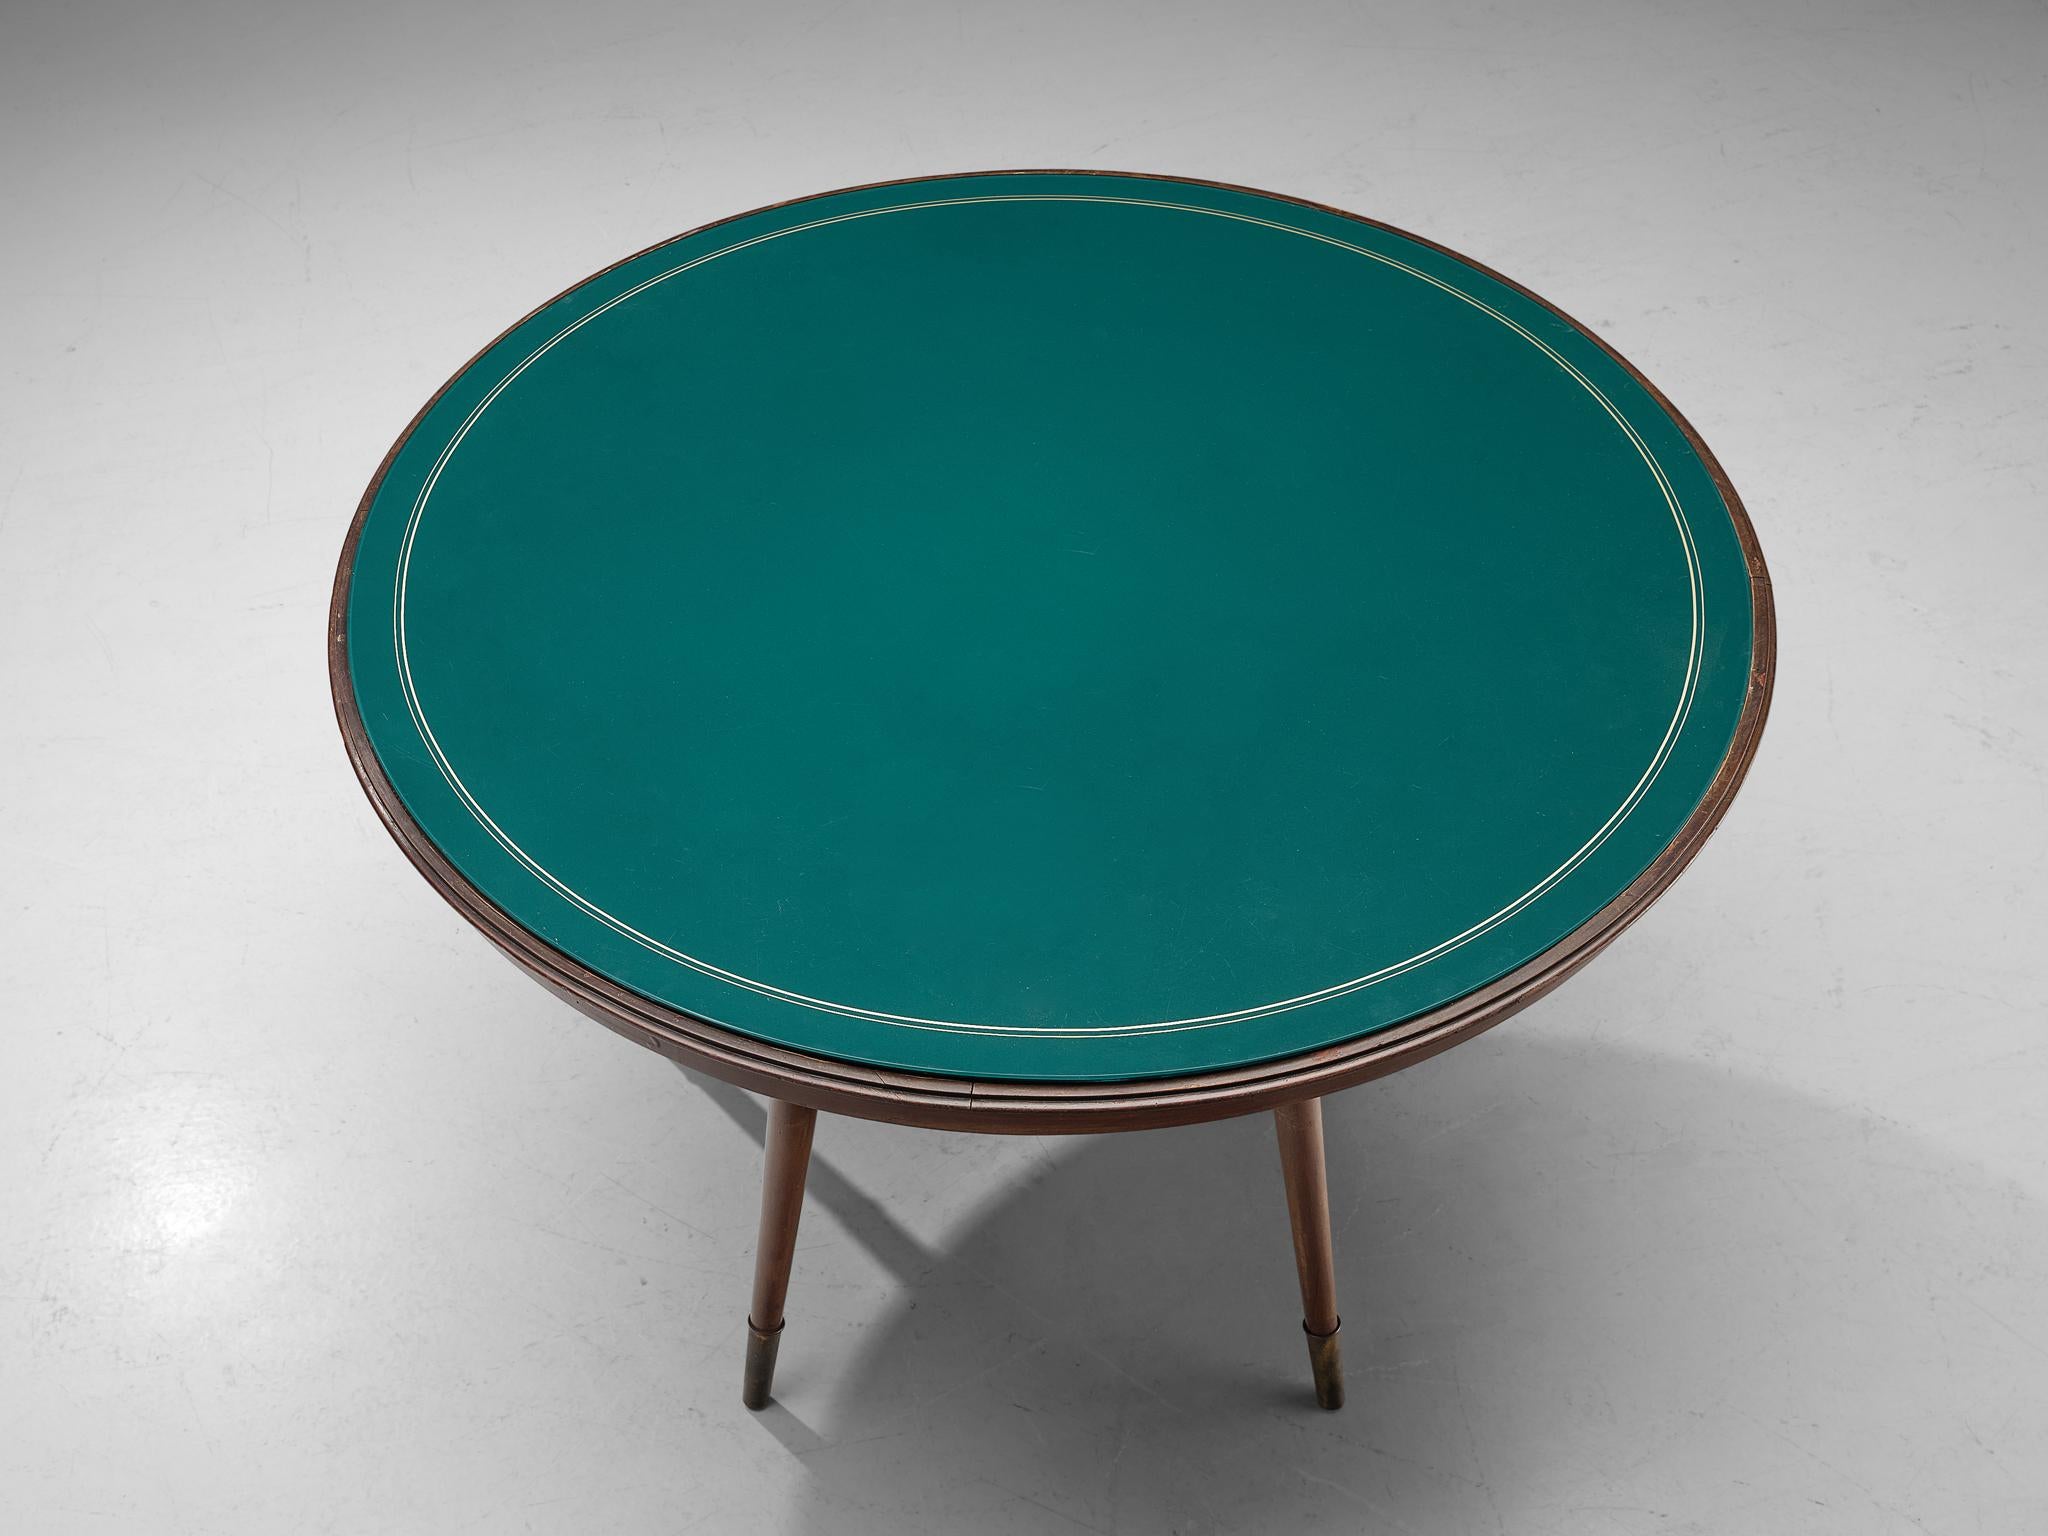 Mid-20th Century Italian Round Table With Glass Top For Sale